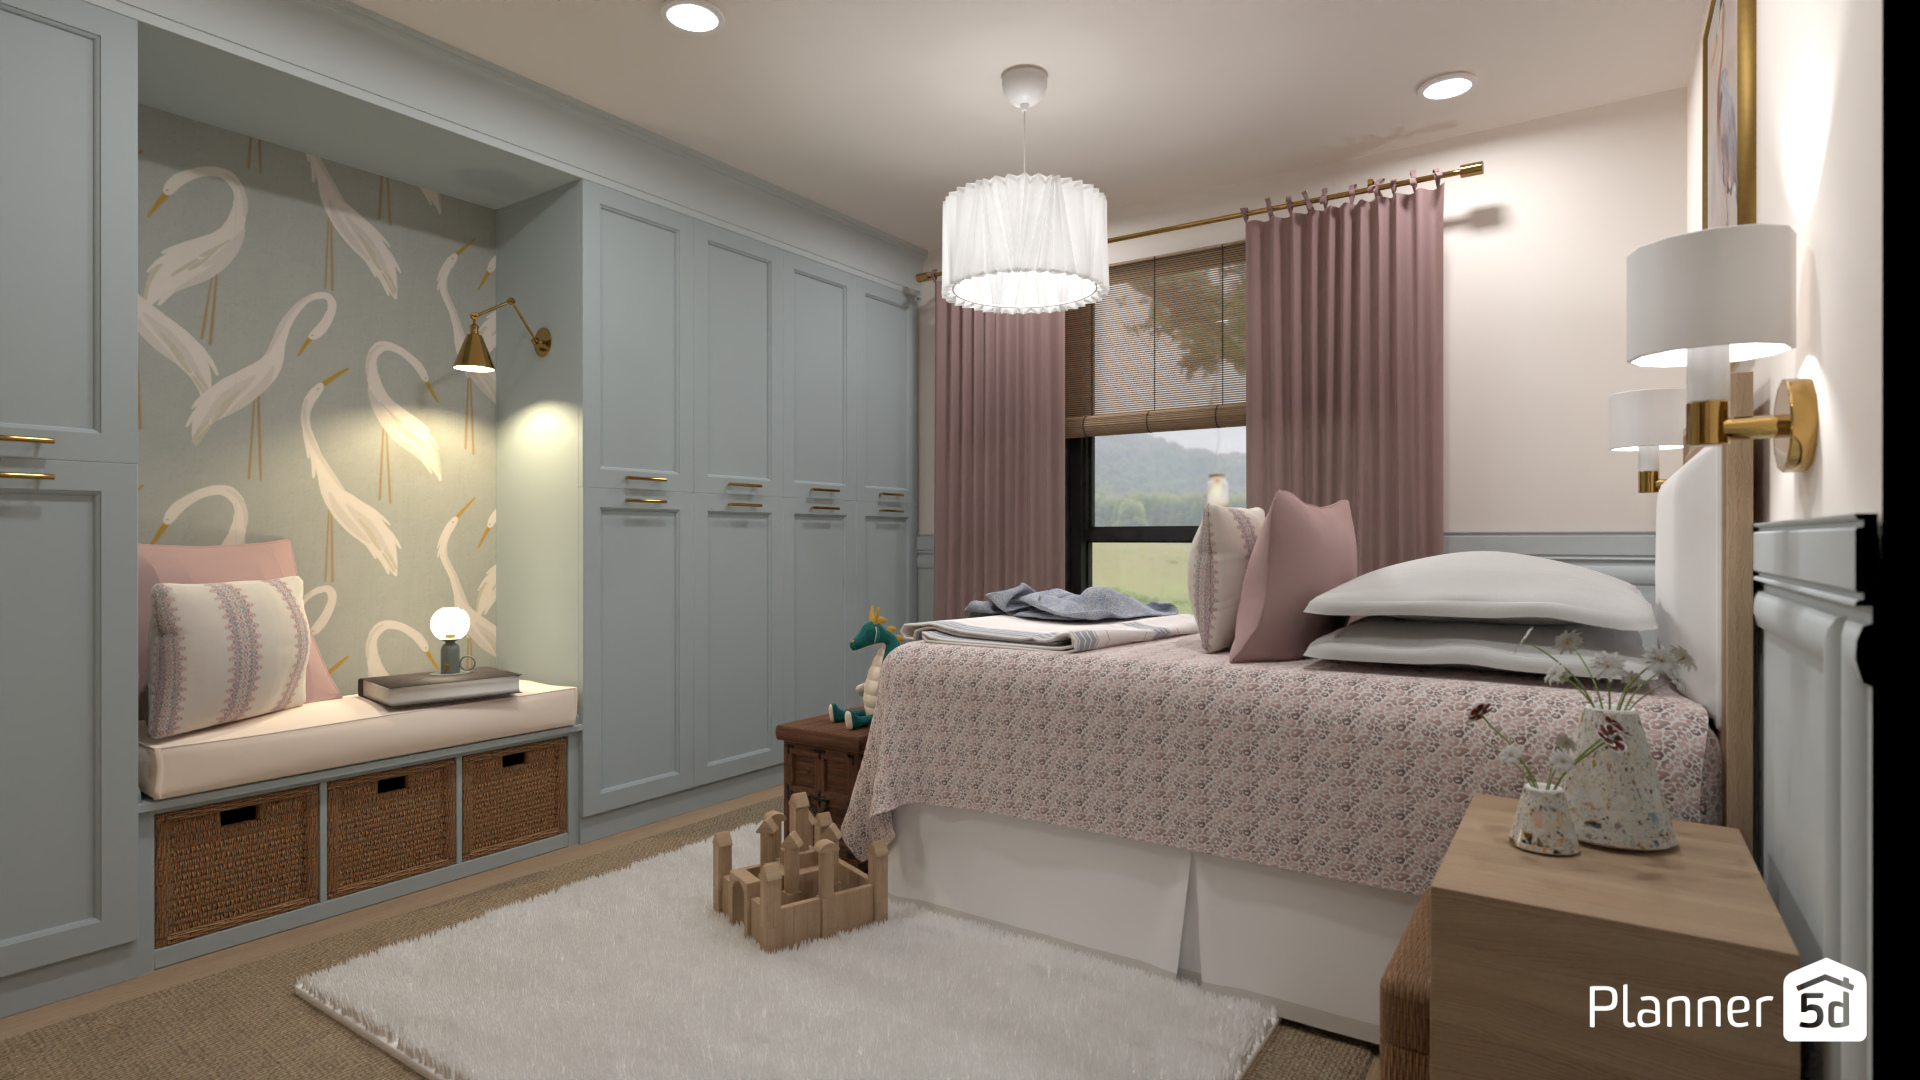 Kid's room in Behr paint colors 16390175 by Darina Doncheva image